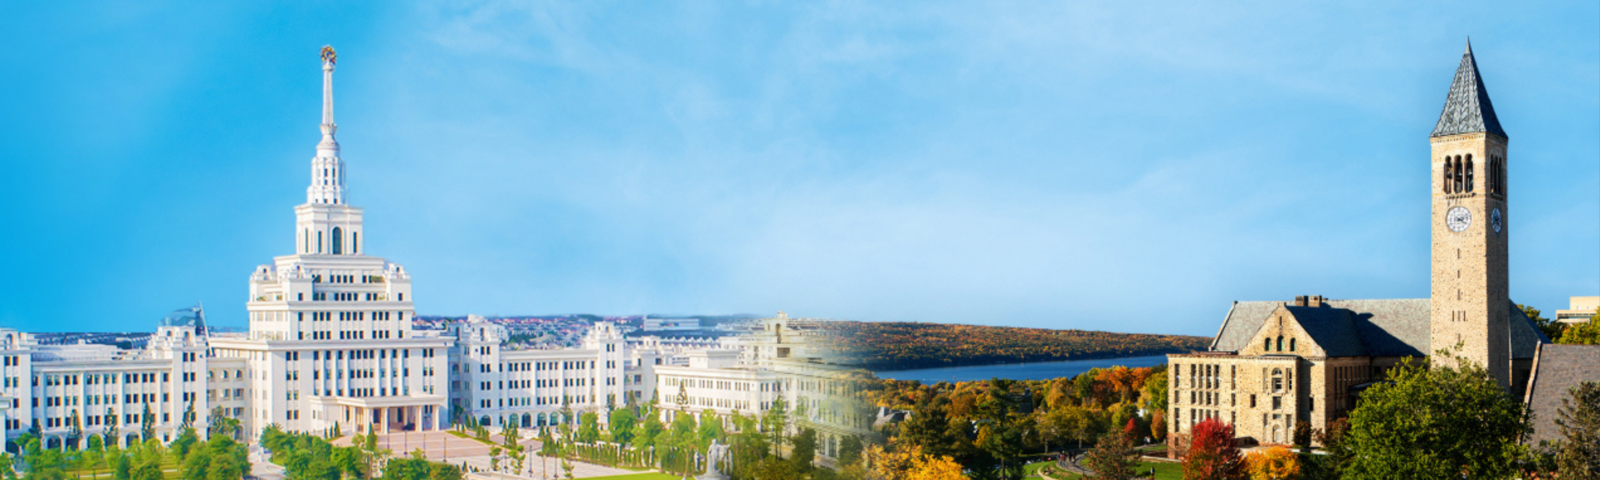 Aerial view of VinUniversity in Vietnam and Cornell University in Ithaca, New York.